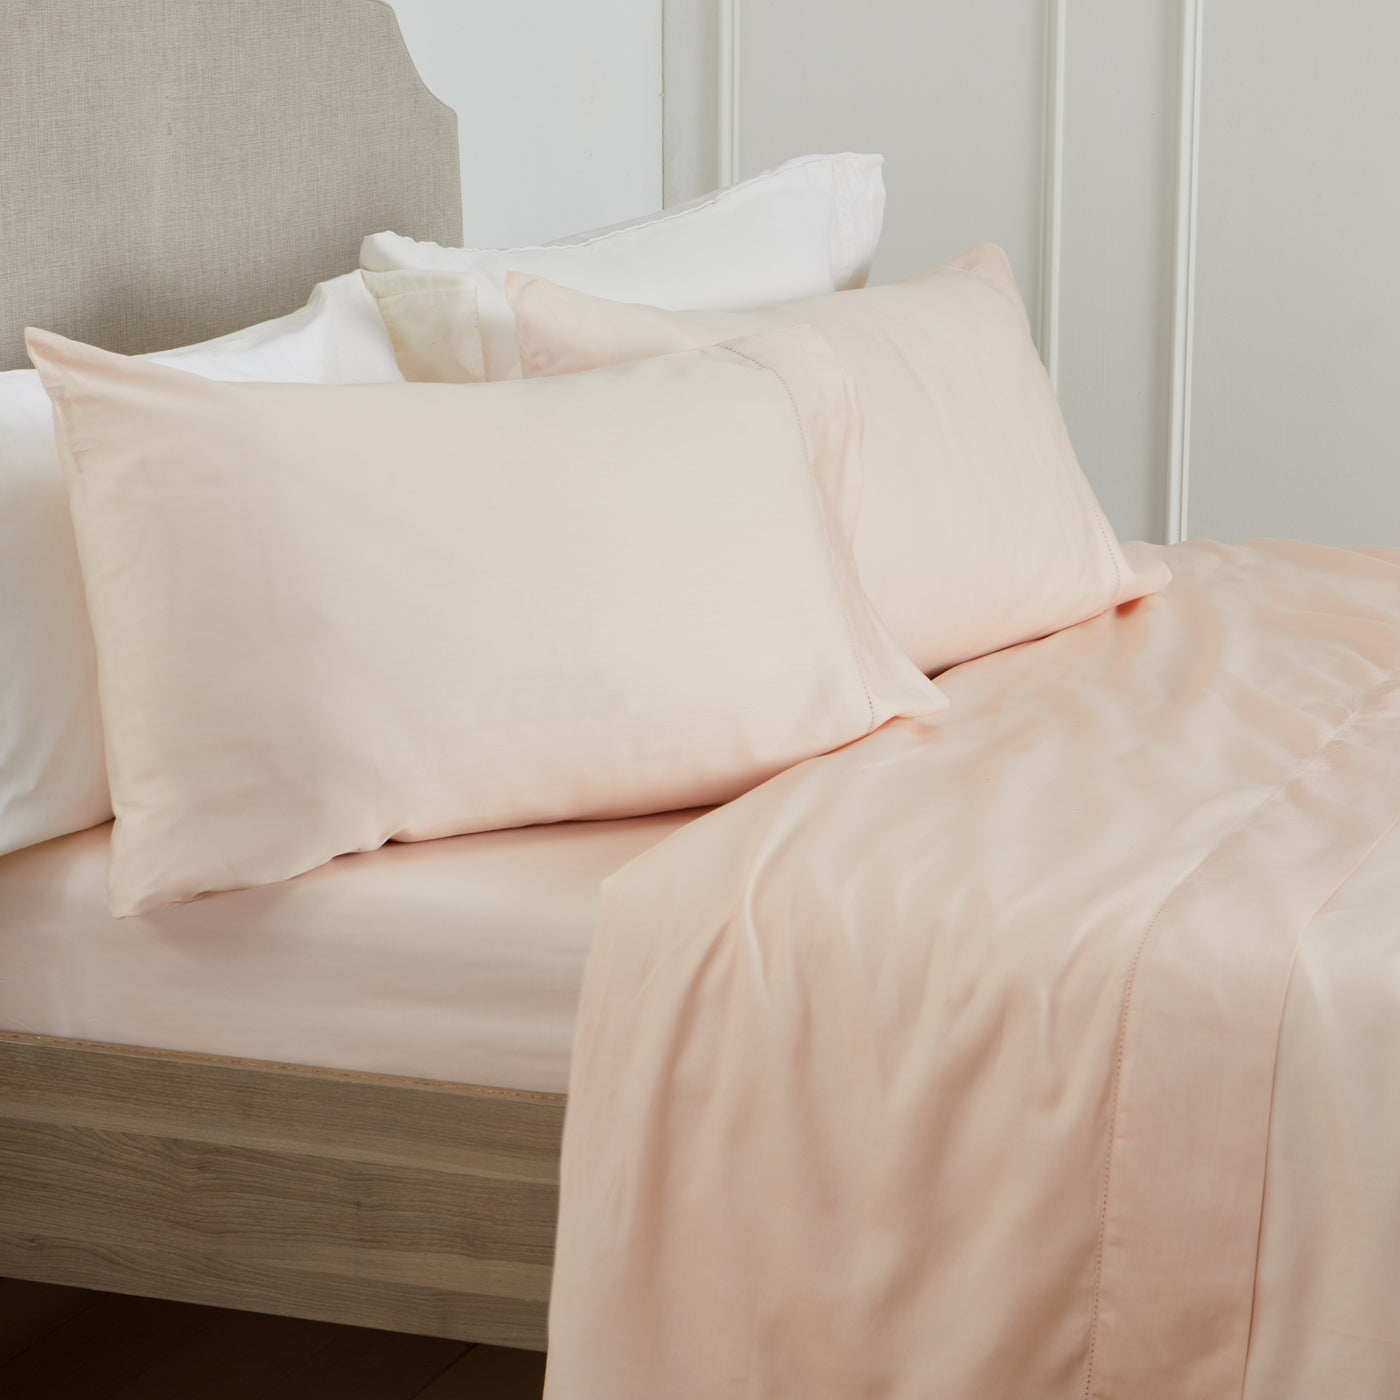 100% Organic Cotton Sheet Set - 300 Thread Count - Bedding Sheets & Pillowcase - Deep Pocket Fits up to a 15-18" Mattress  - Organic Certified -  Blush Color Comfort & Care Collection